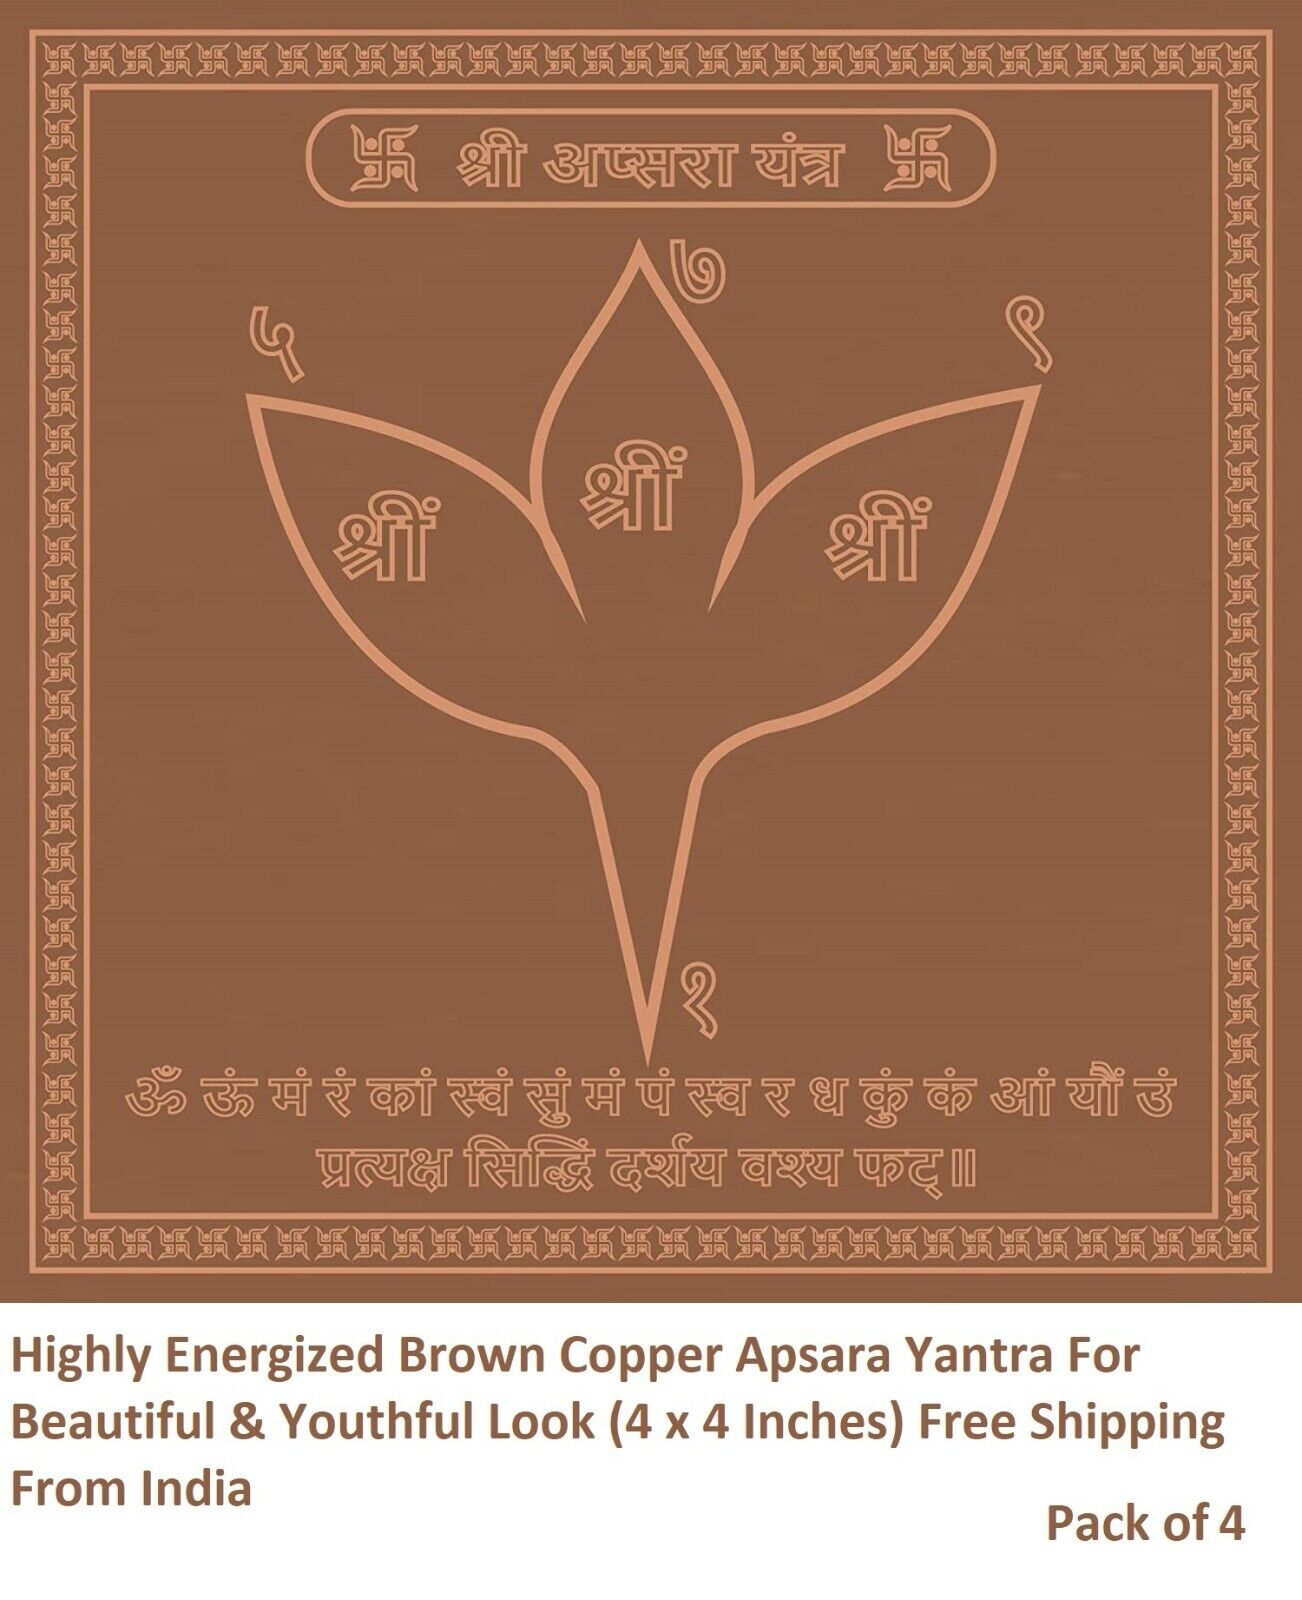 4 x Highly Energized Brown Copper Apsara Yantra For Beautiful & Youthful Look